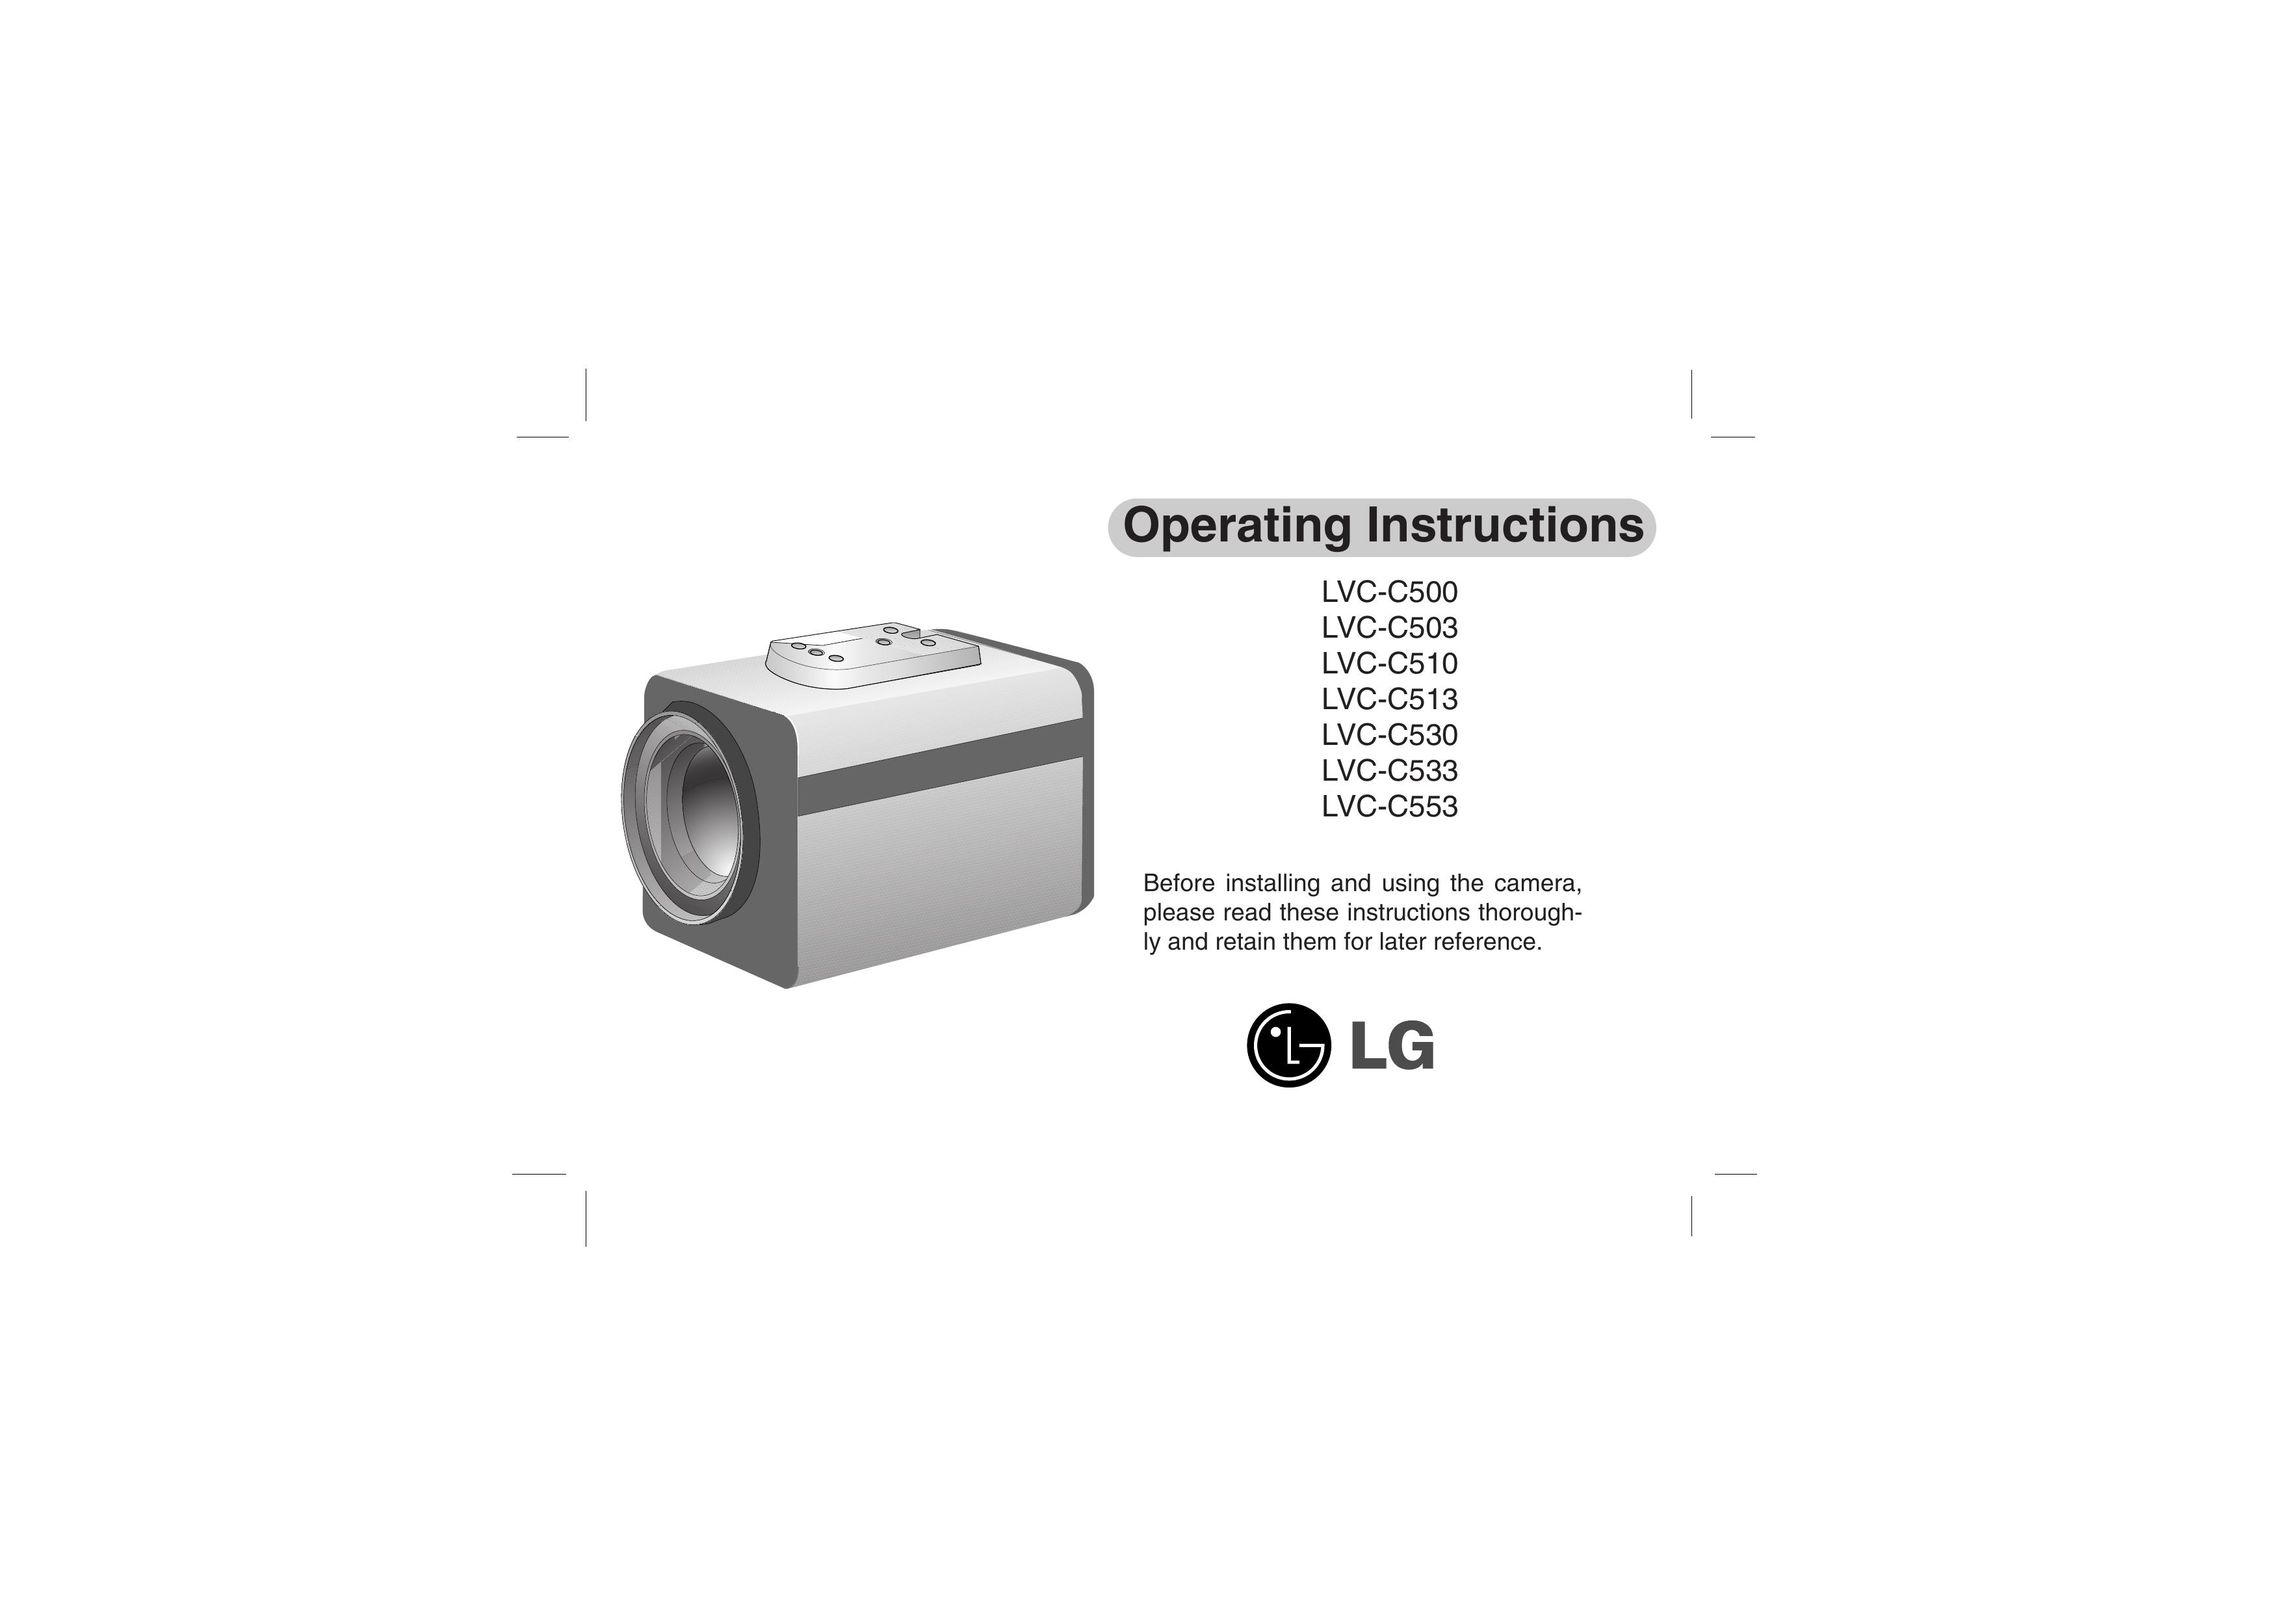 LG Electronics LVC-C503 Home Security System User Manual